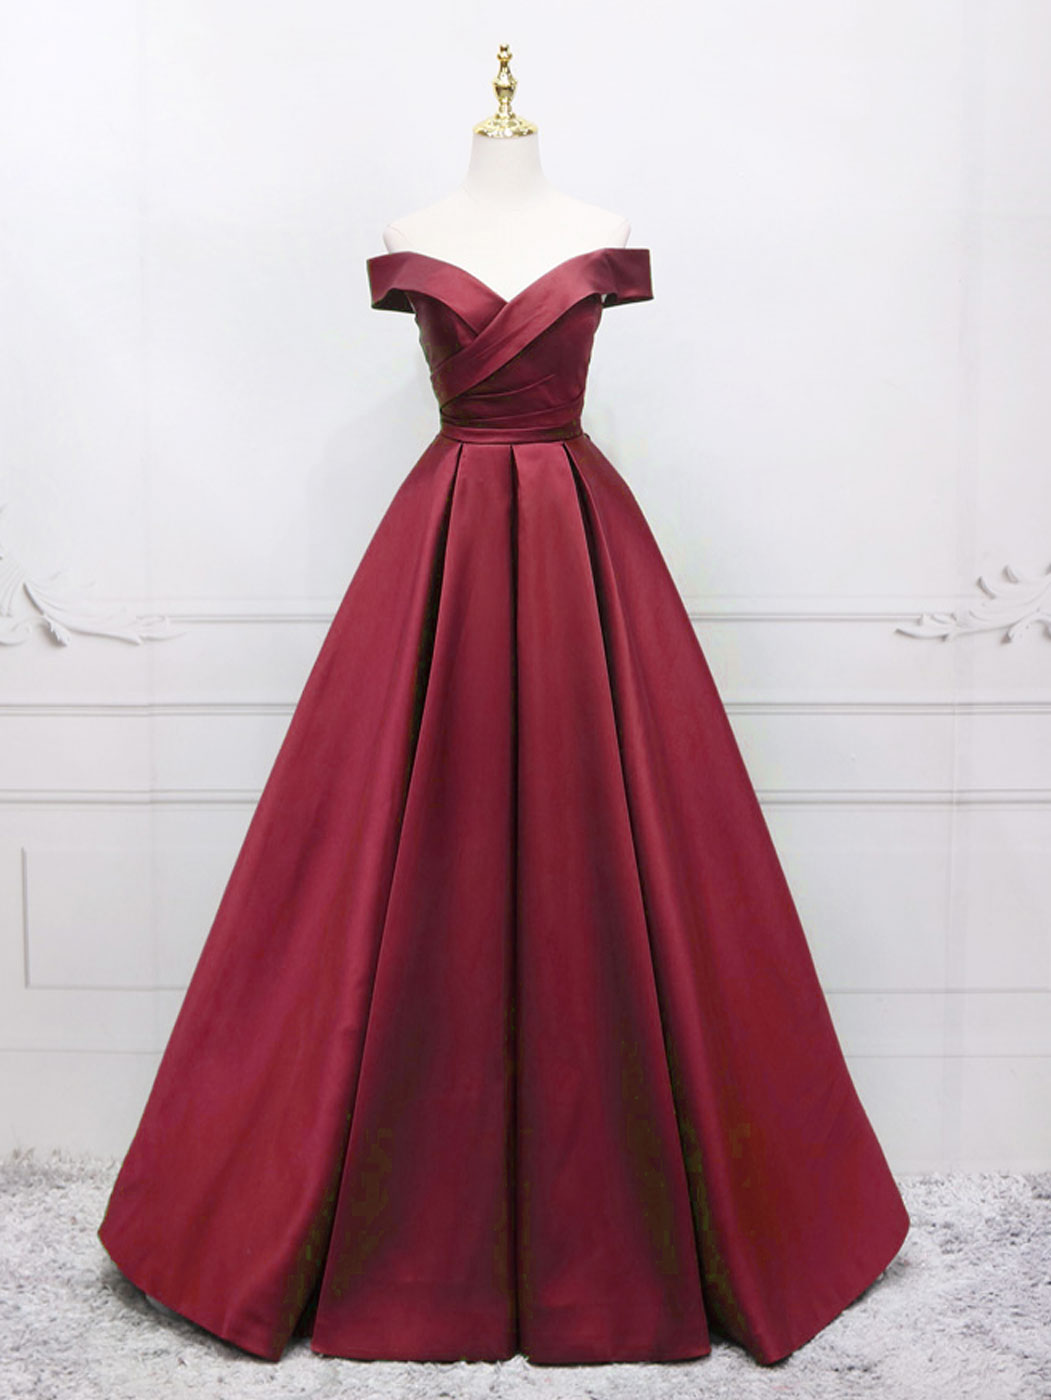 Classy Burgundy Off The Shoulder Ball Gown Formal Dress Prom Dress - DollyGown